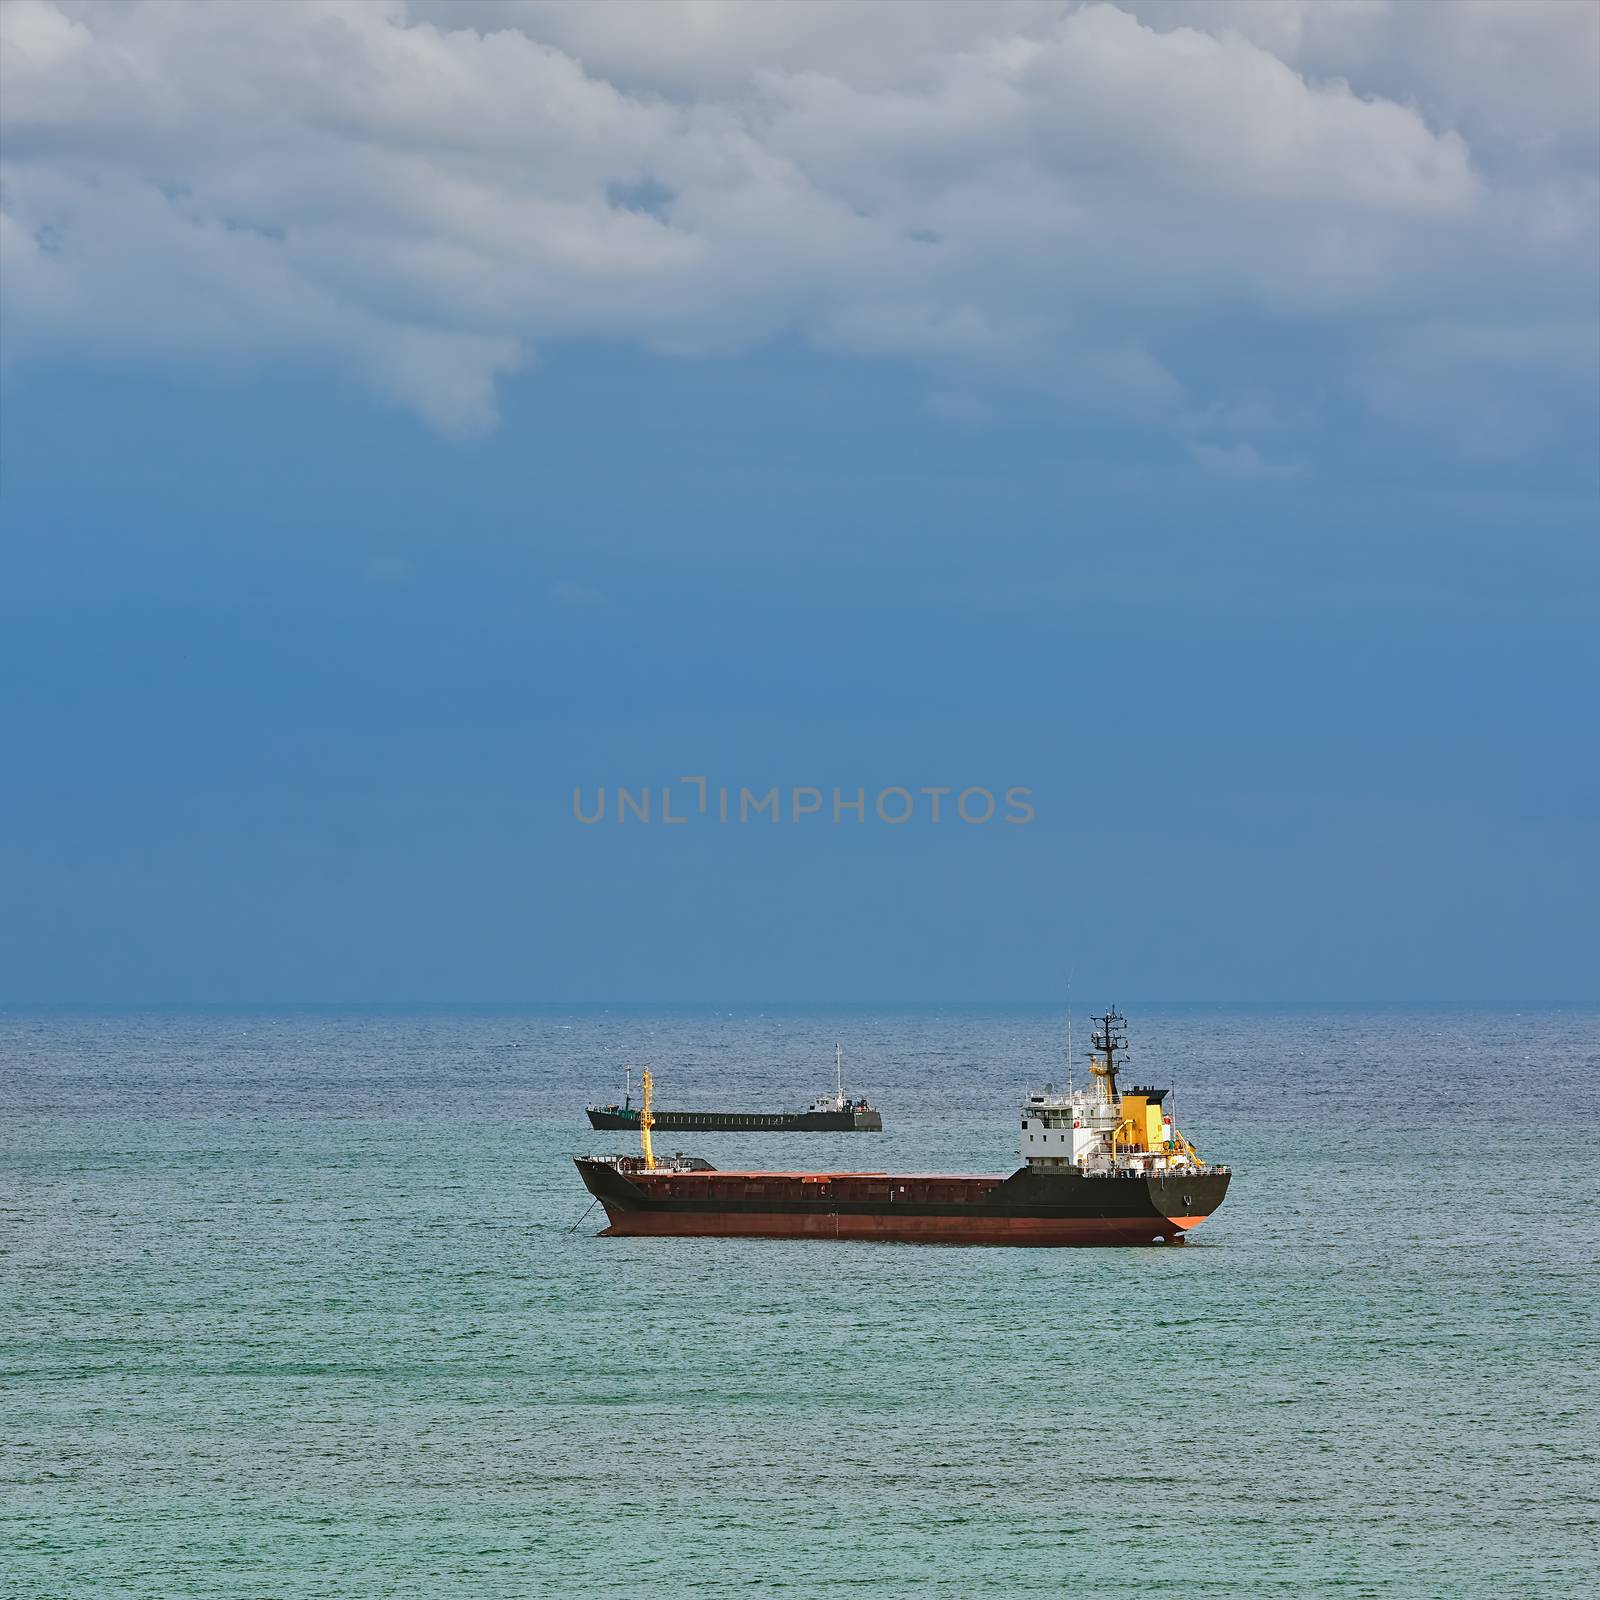 General Cargo Ship in the Sea by SNR